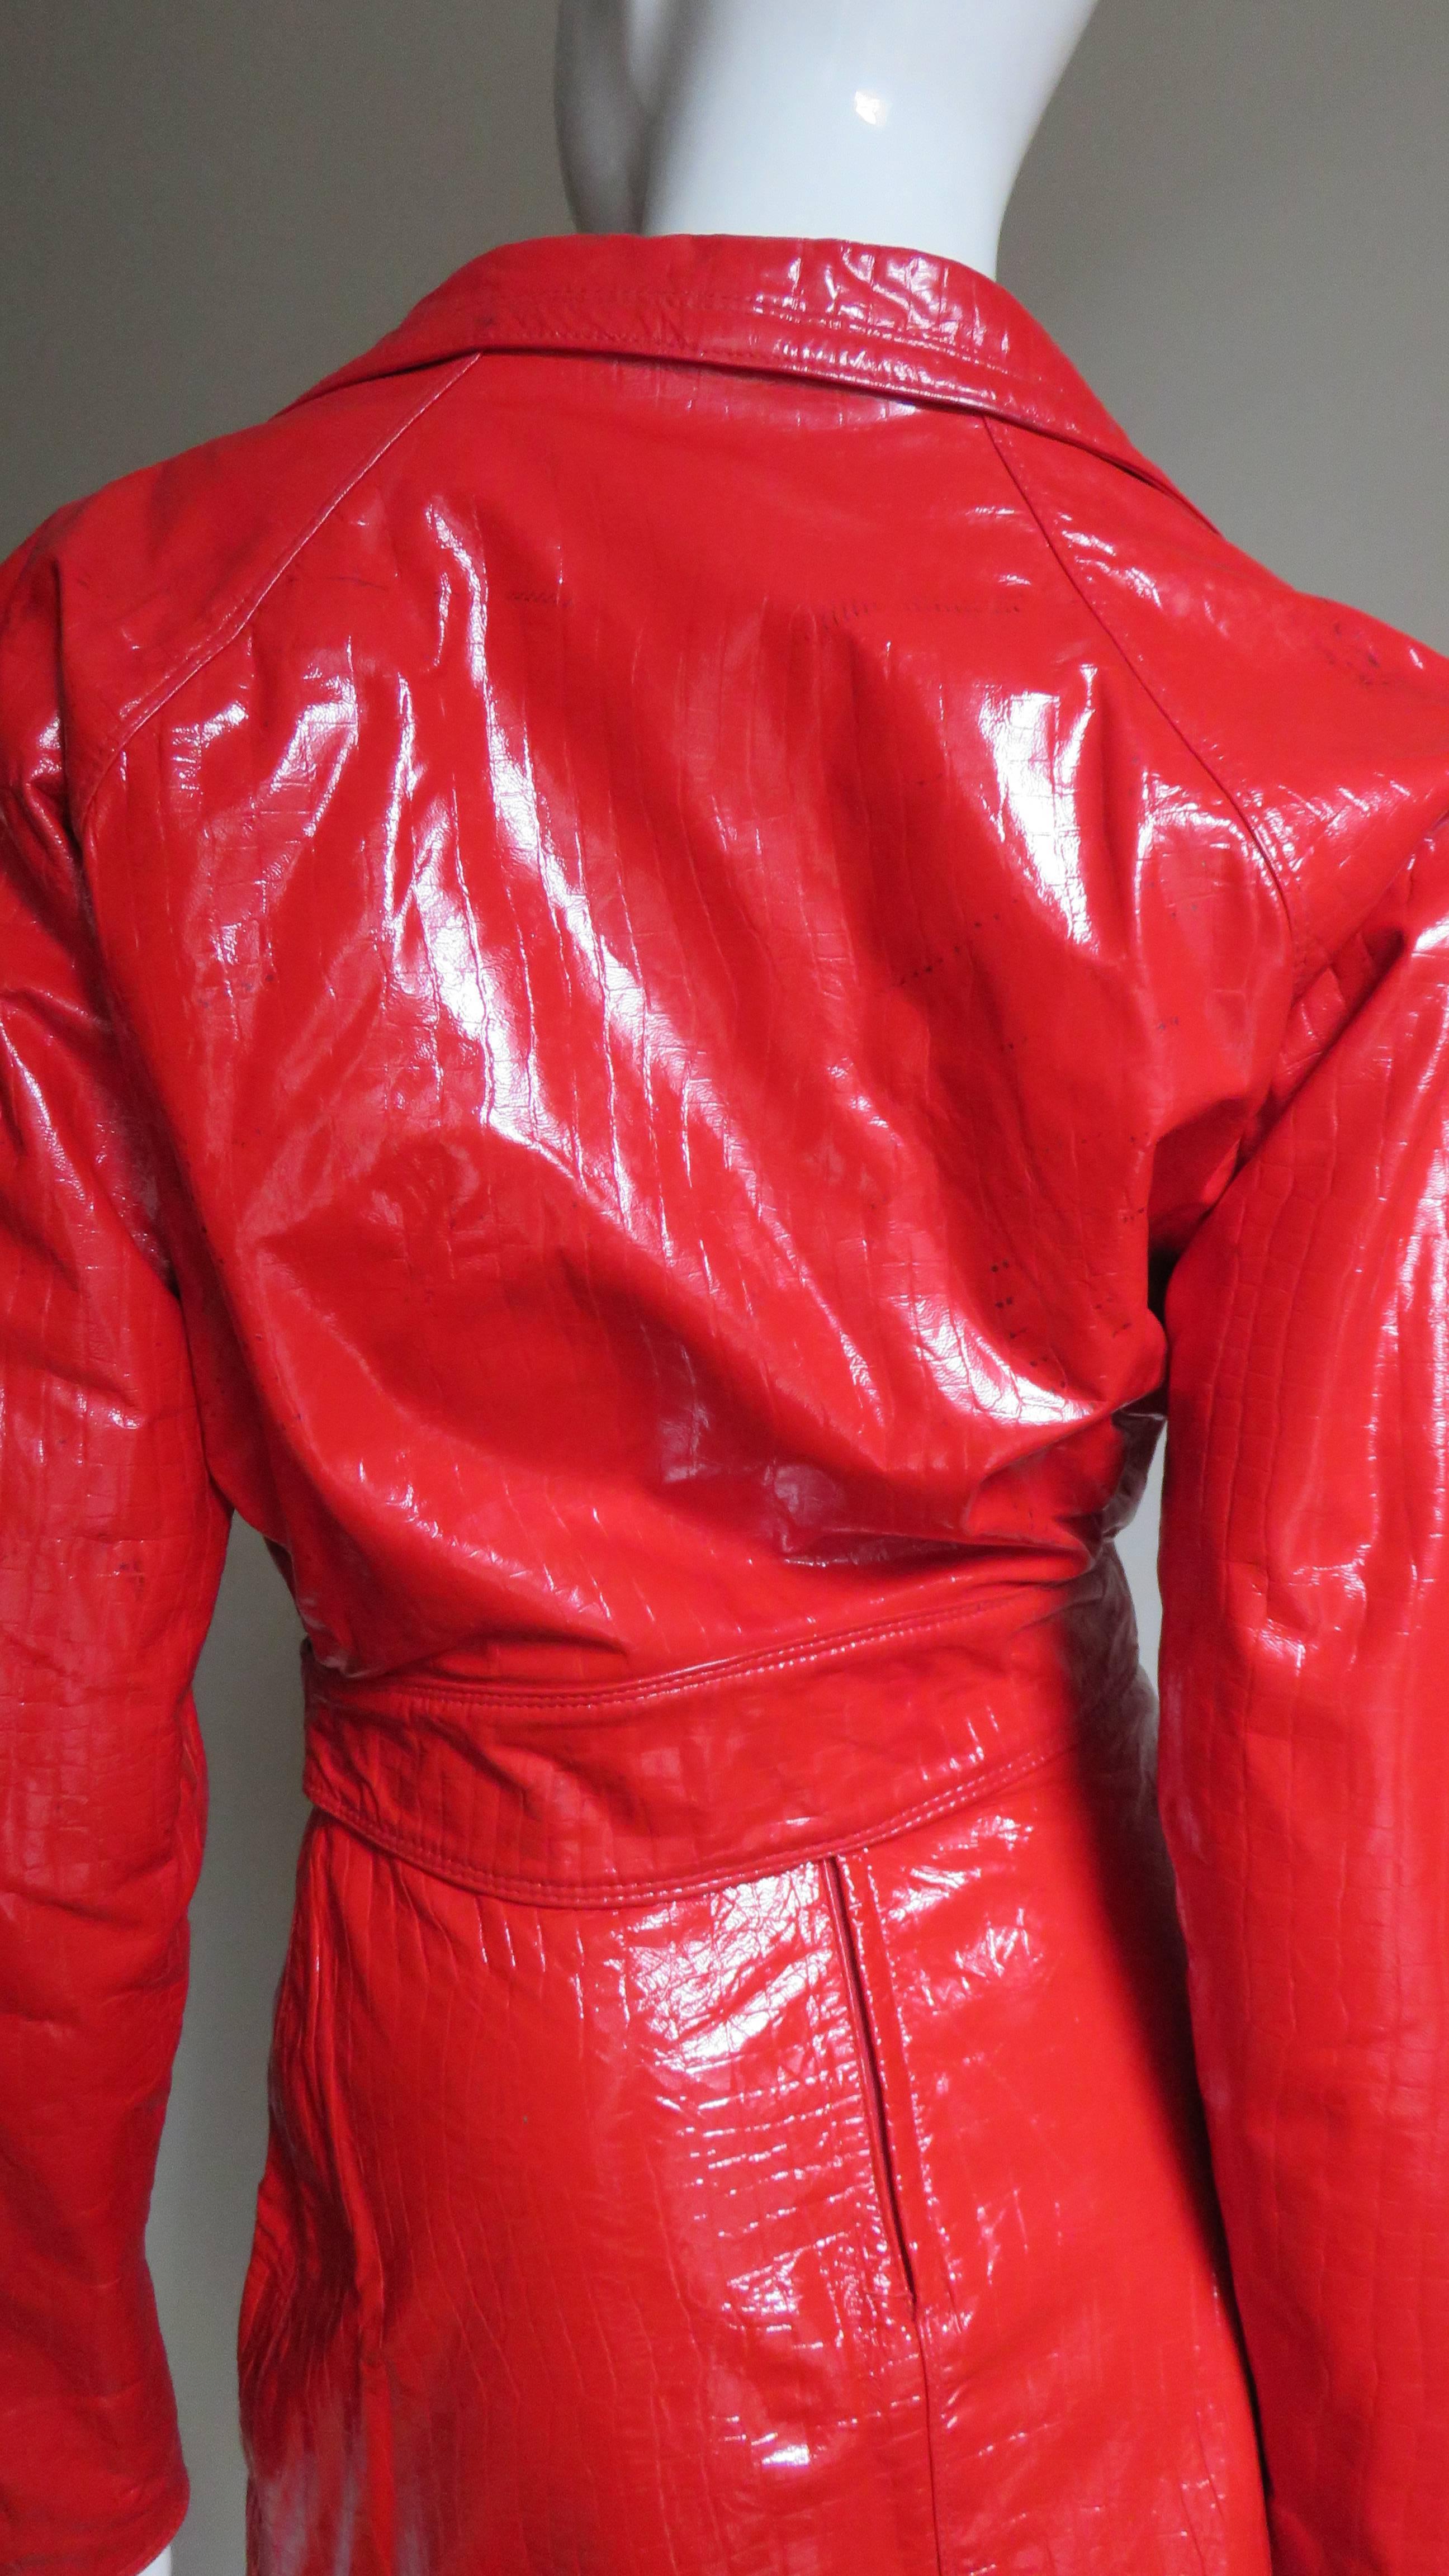 Gianni Versace Red Leather Motorcycle Jacket and Skirt A/W 1994 For Sale 3